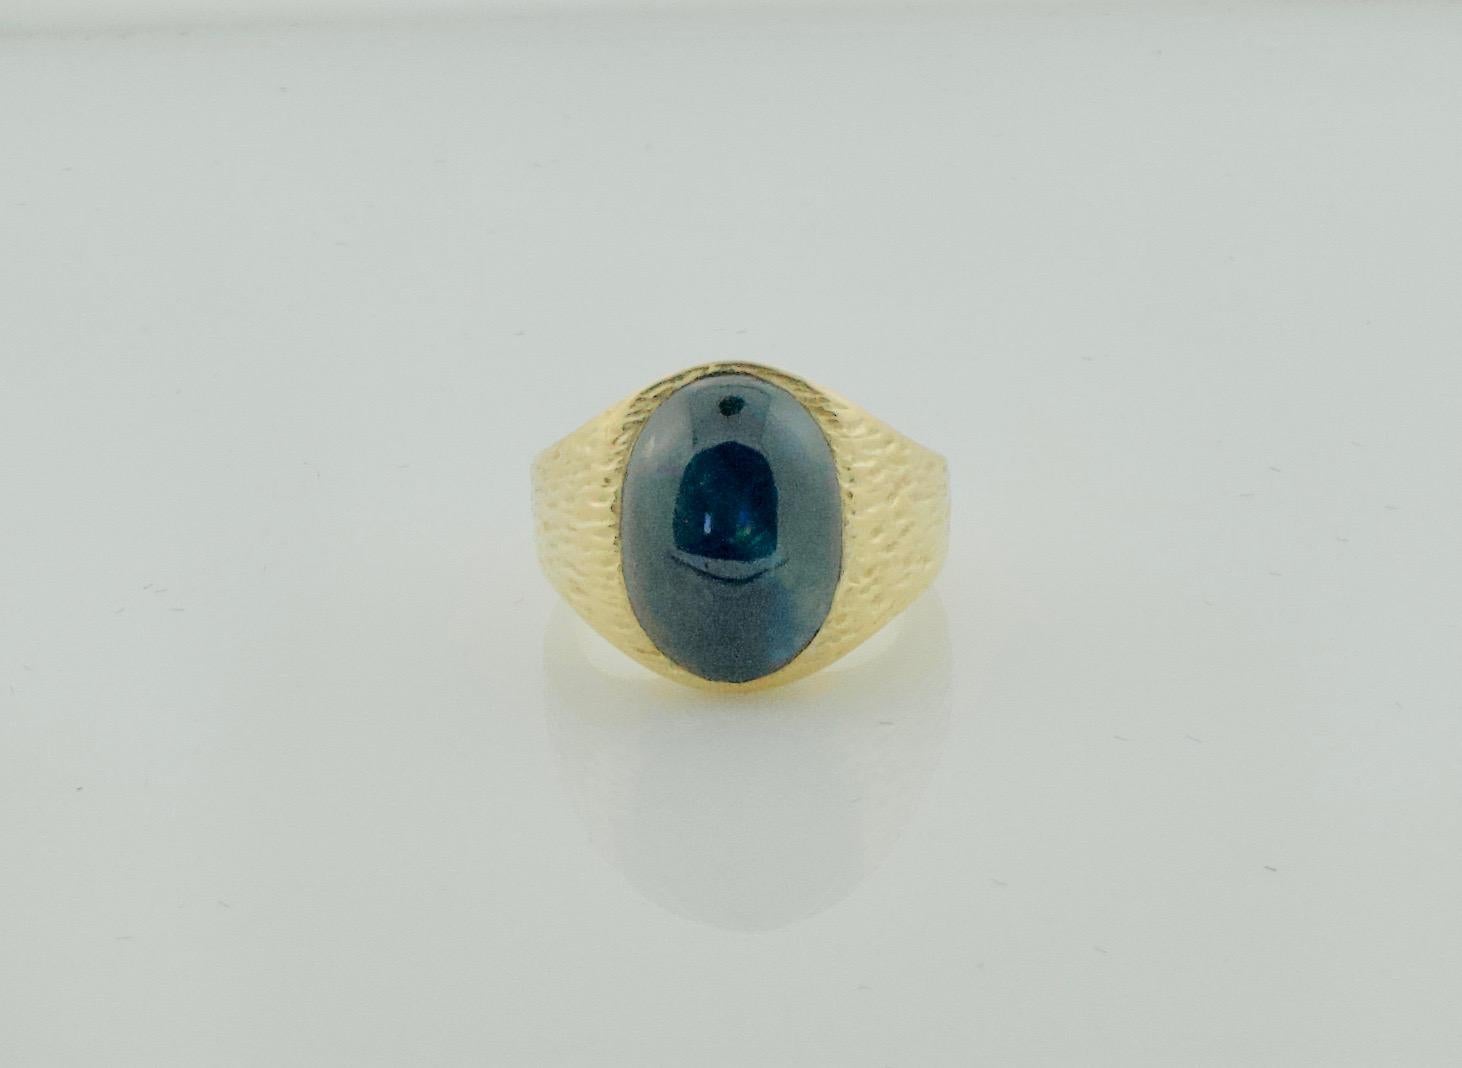 Cabochon Sapphire Pinky Ring with Bark Finish in Yellow Gold
One Cabochon Sapphire Weighing 15.00 carats approximately 16mm x 11mm x 8.5mm
Dark Blue with a hint of a star
Great For Flexing 
Size 8 1/4
